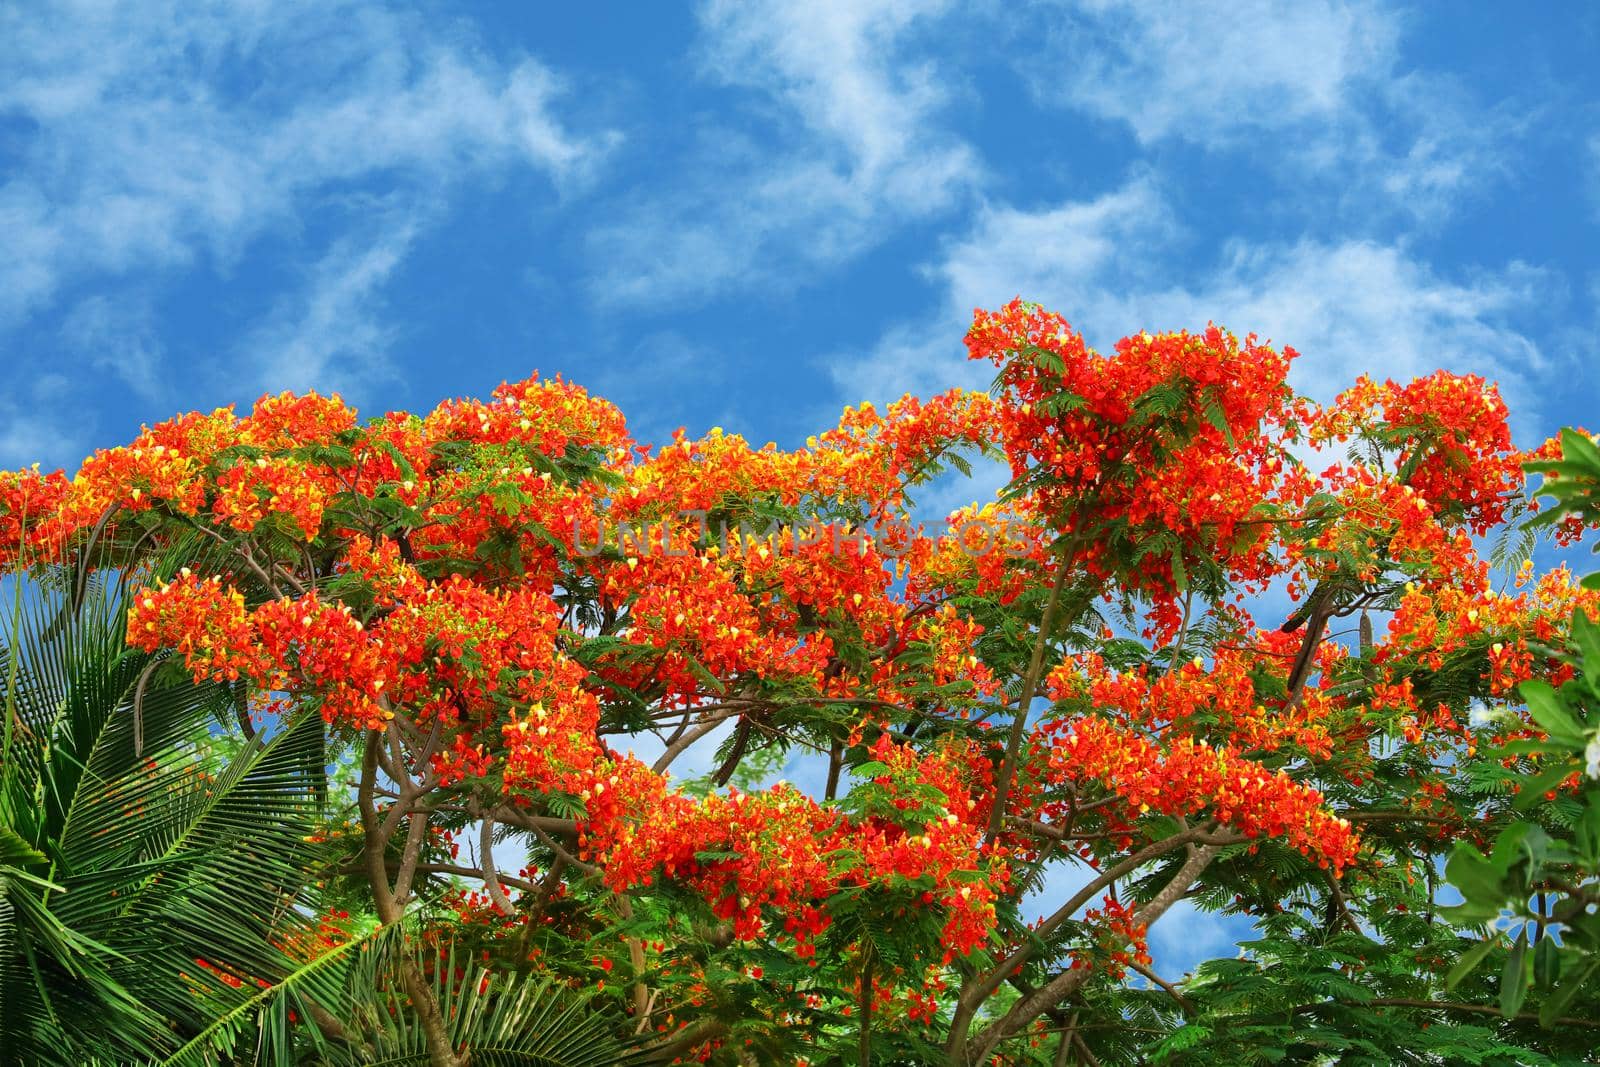 flame tree red flower blooming new born green leaves on the tree by Darkfox